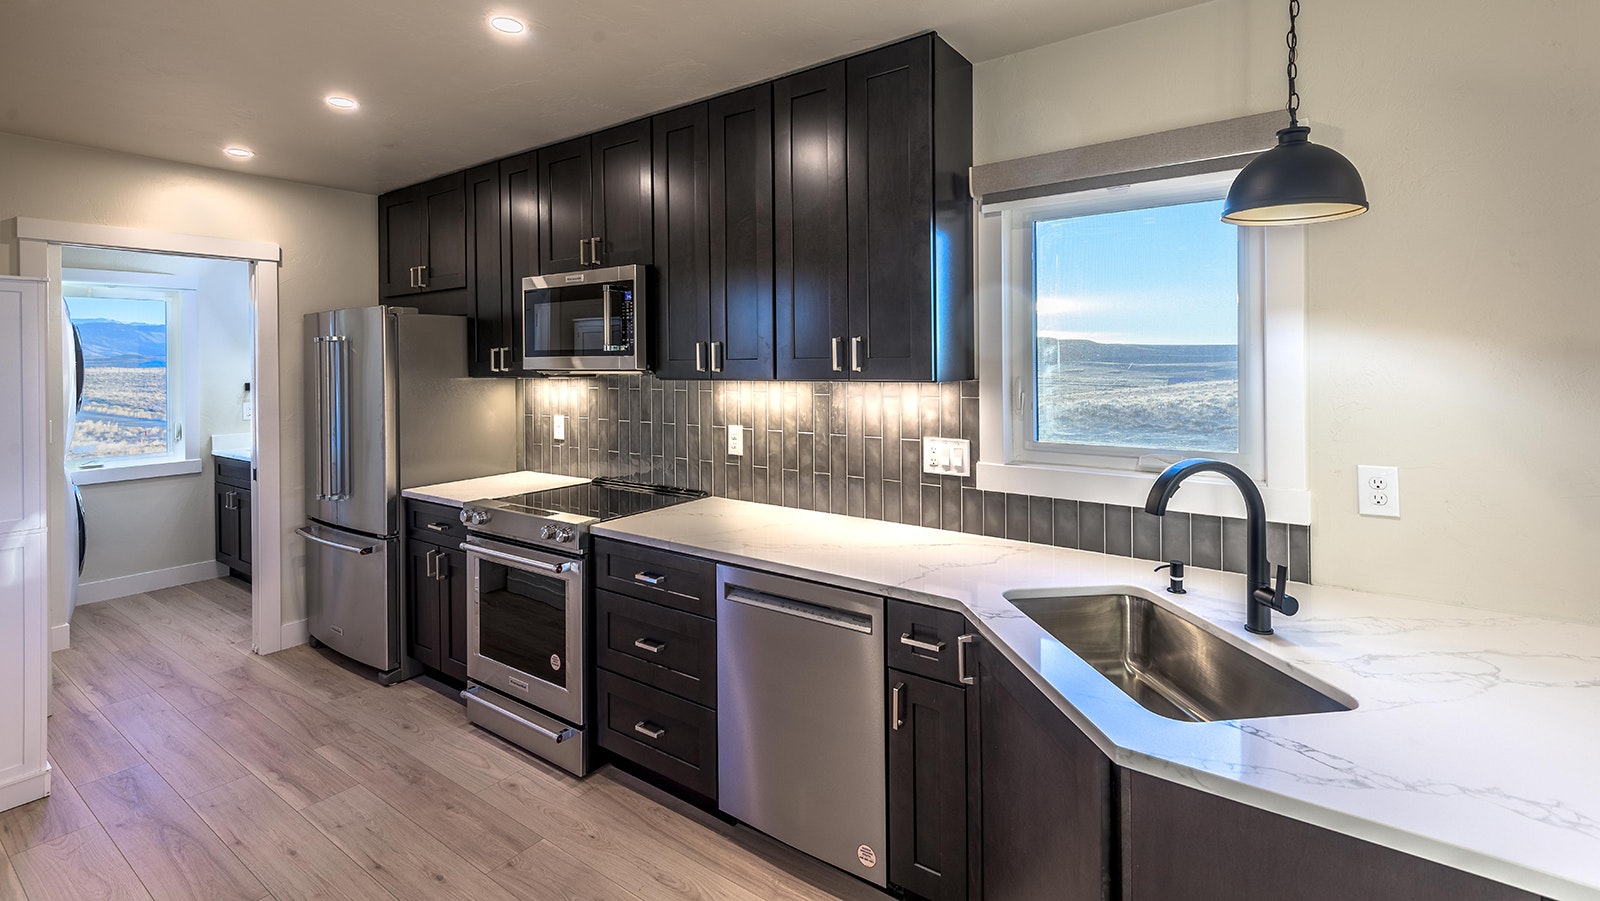 The kitchen in this demonstration home features top-level appliances and fixtures.